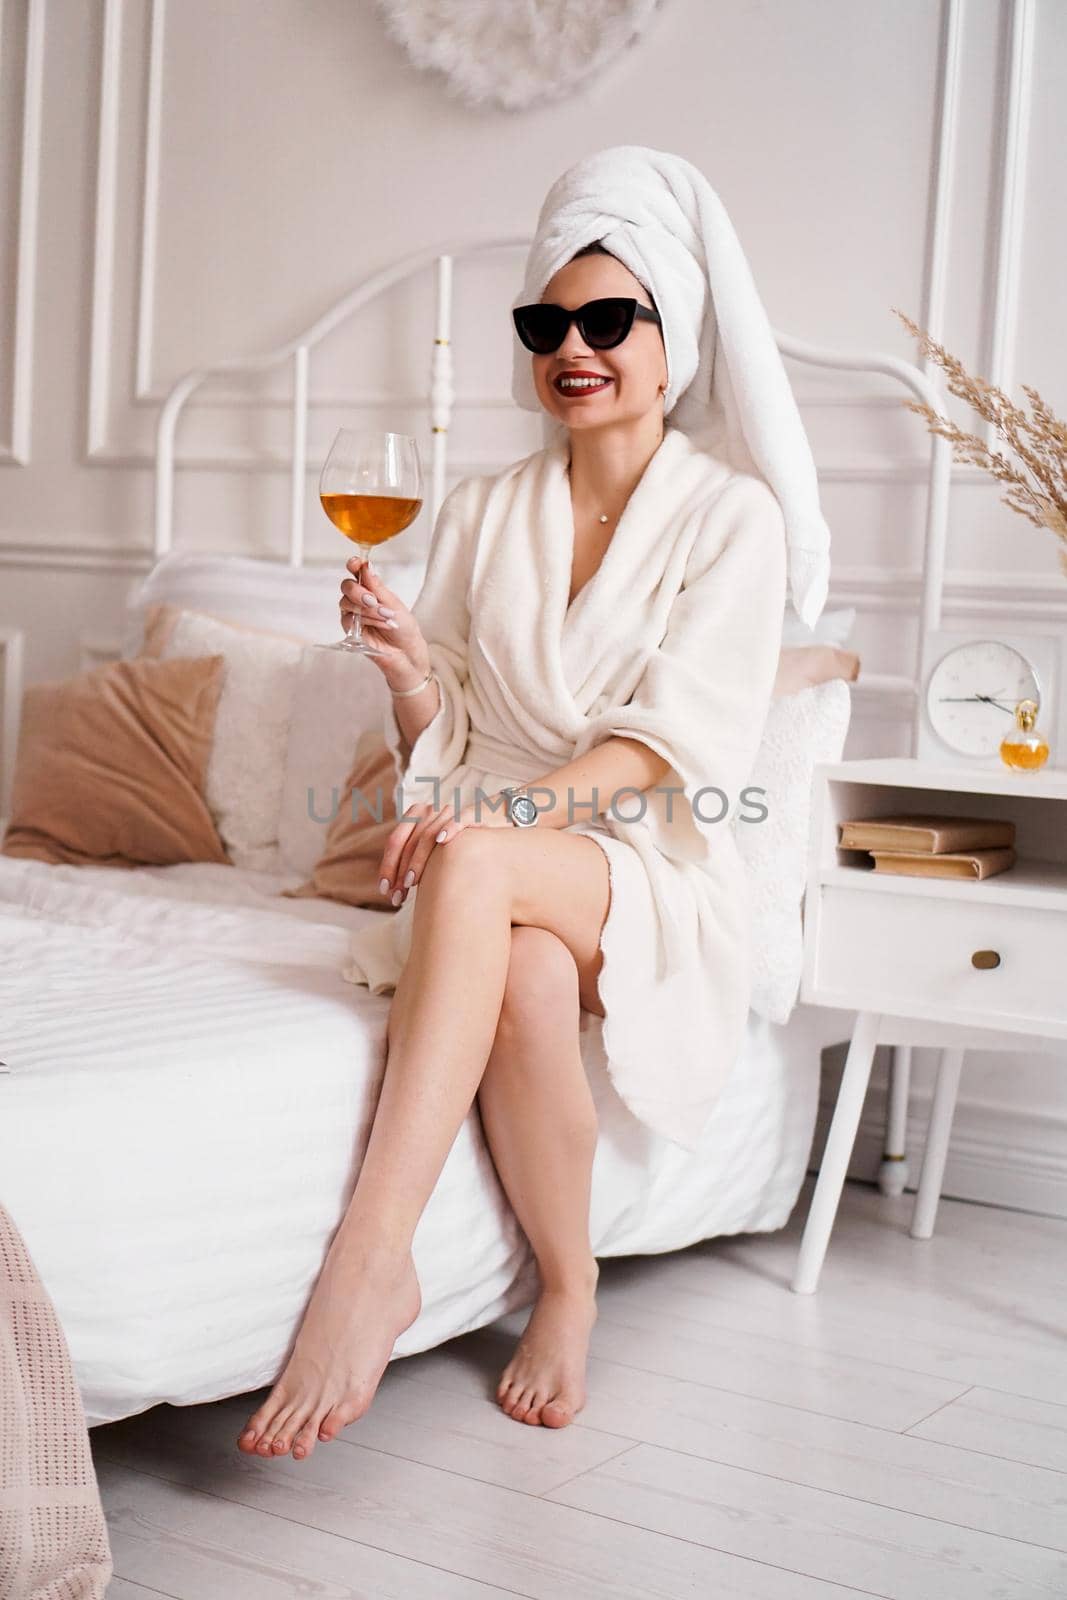 Woman in a white bathrobe, towel and sunglasses. She is holding a glass of wine by natali_brill